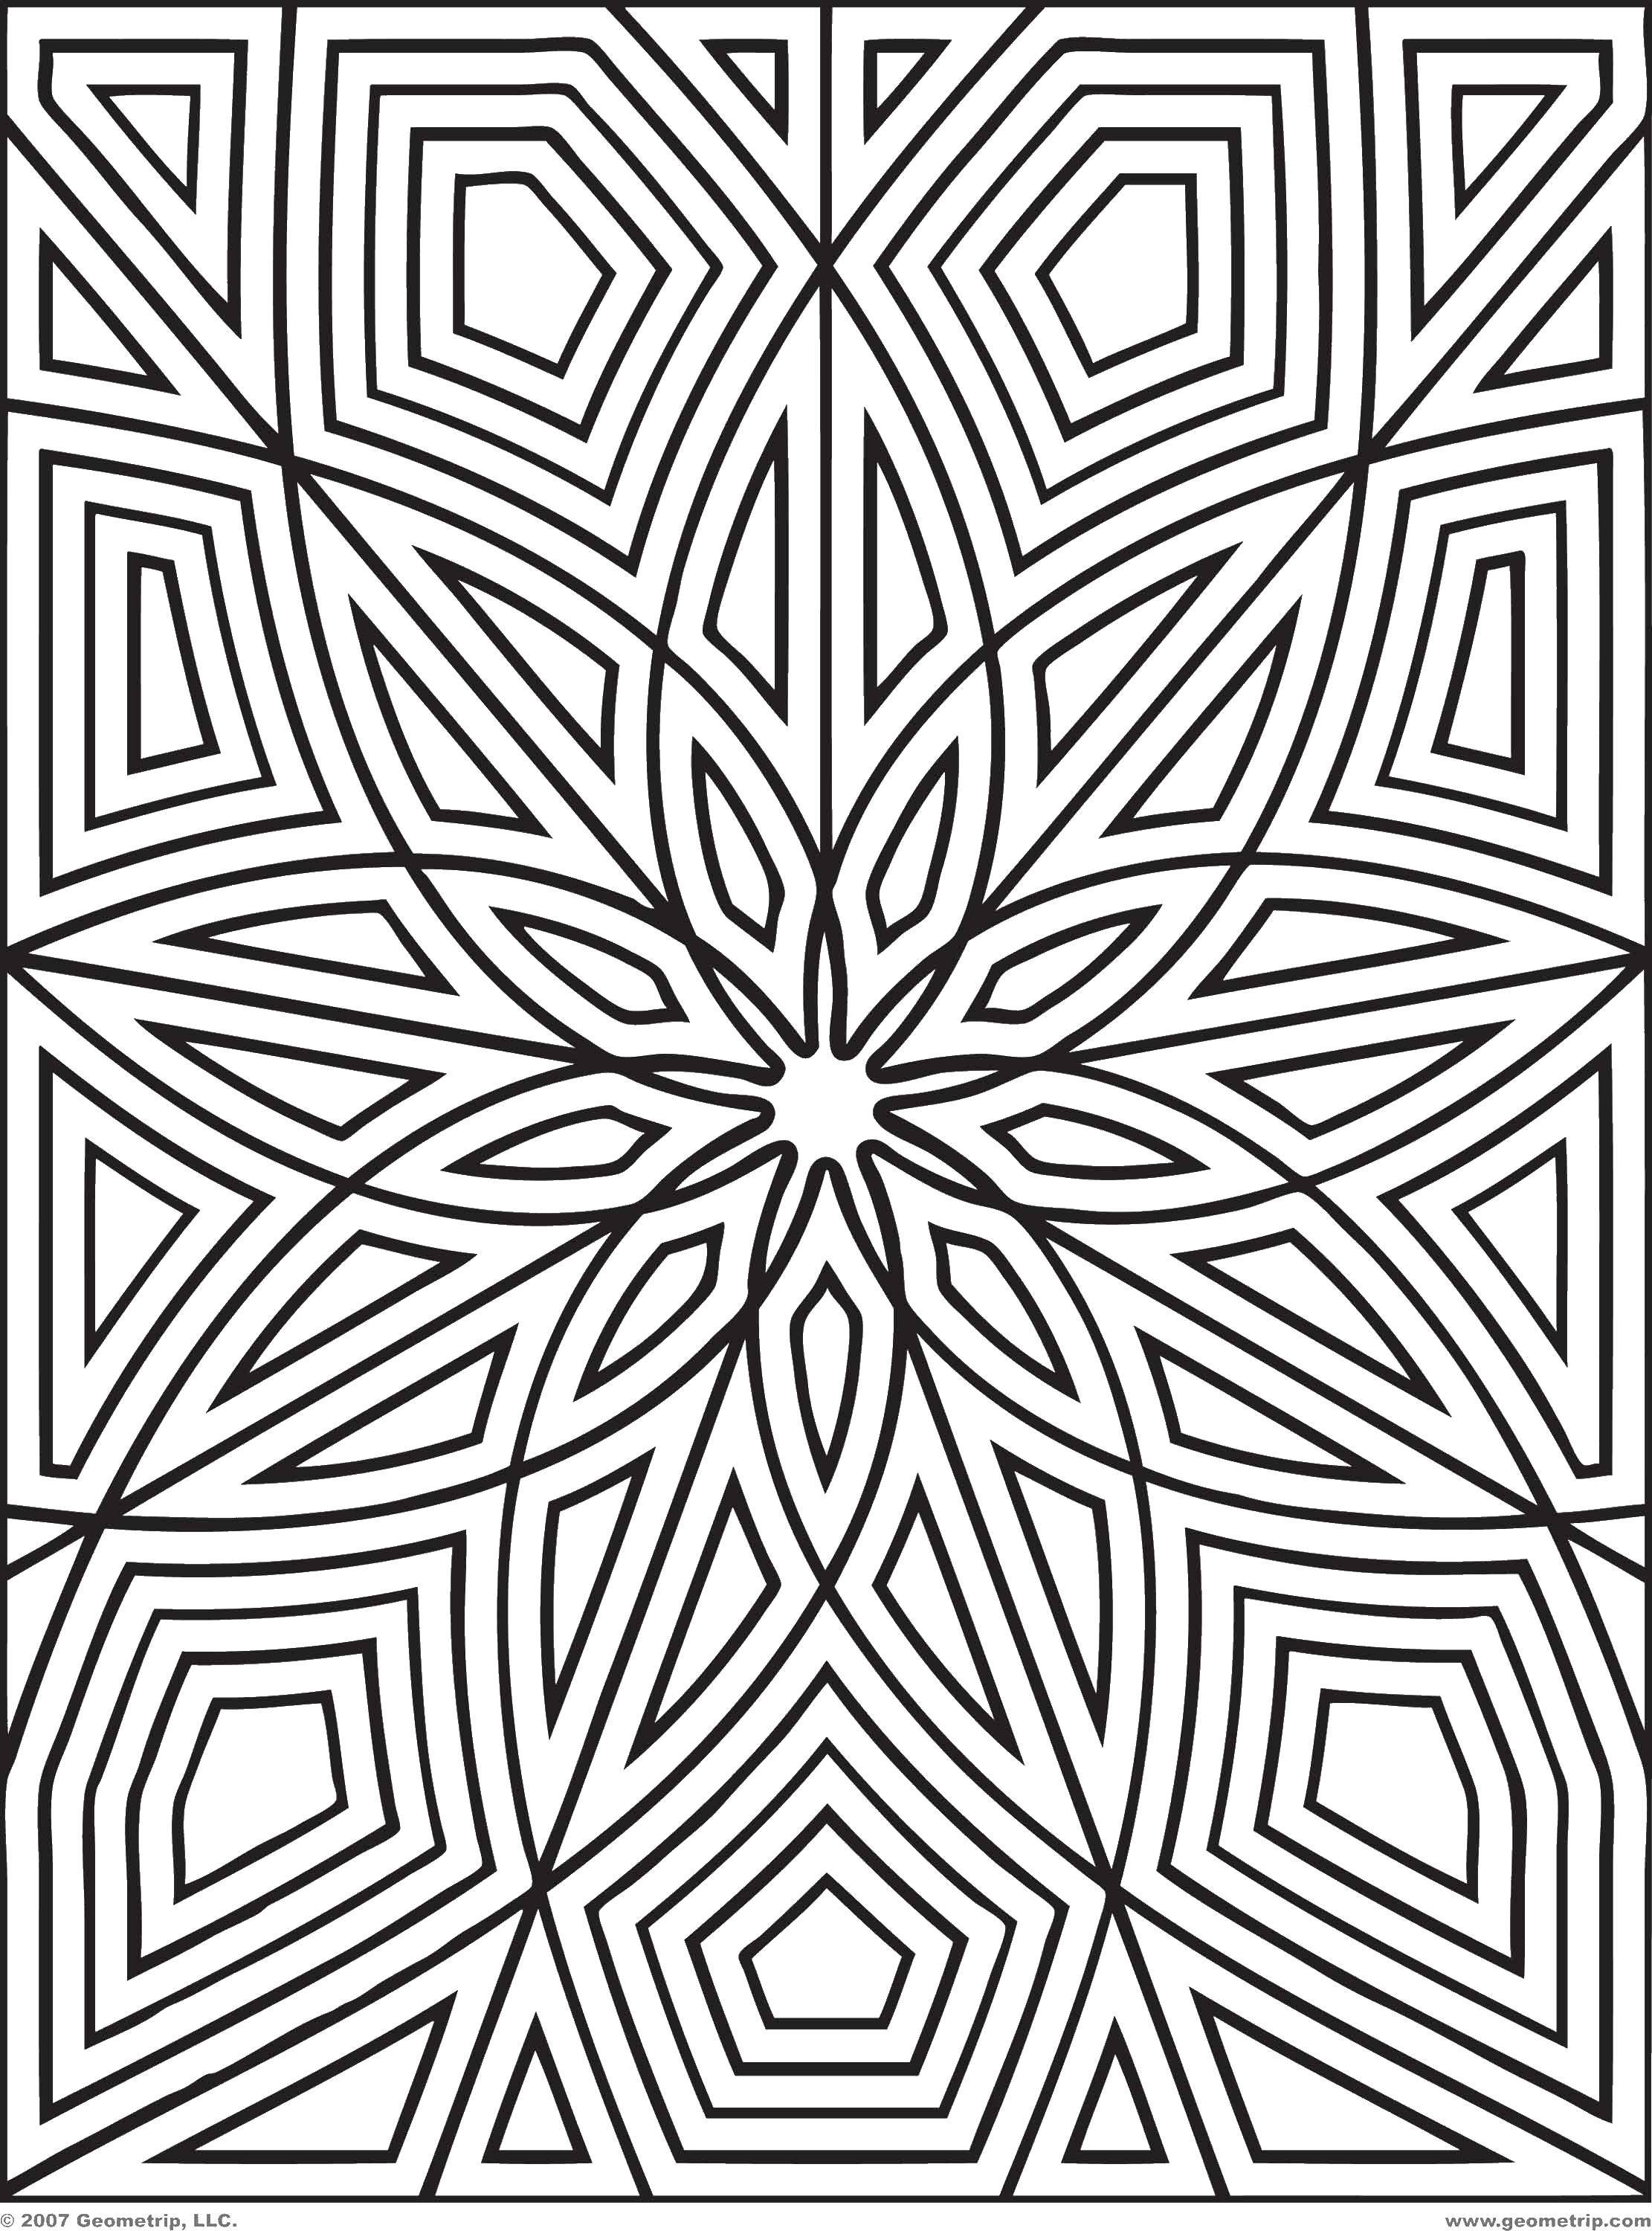 Coloring Patterns. Category patterns. Tags:  antisress, patterns, shapes.